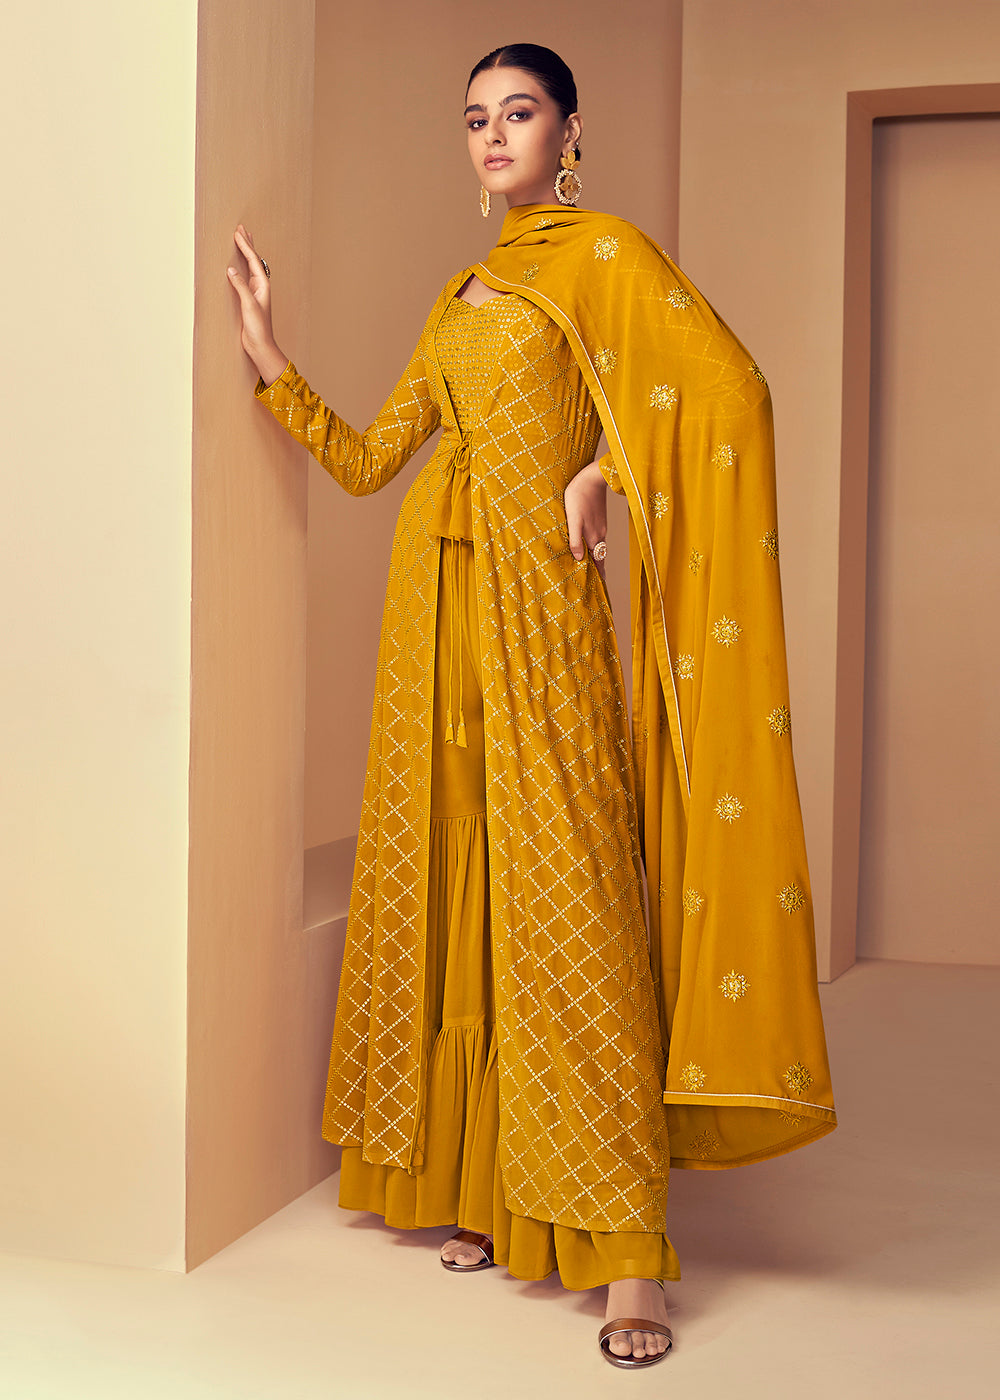 Buy Now Bright Yellow Jacket Style Party Wear Indo Western Dress Online in USA, UK, Canada & Worldwide at Empress Clothing. 